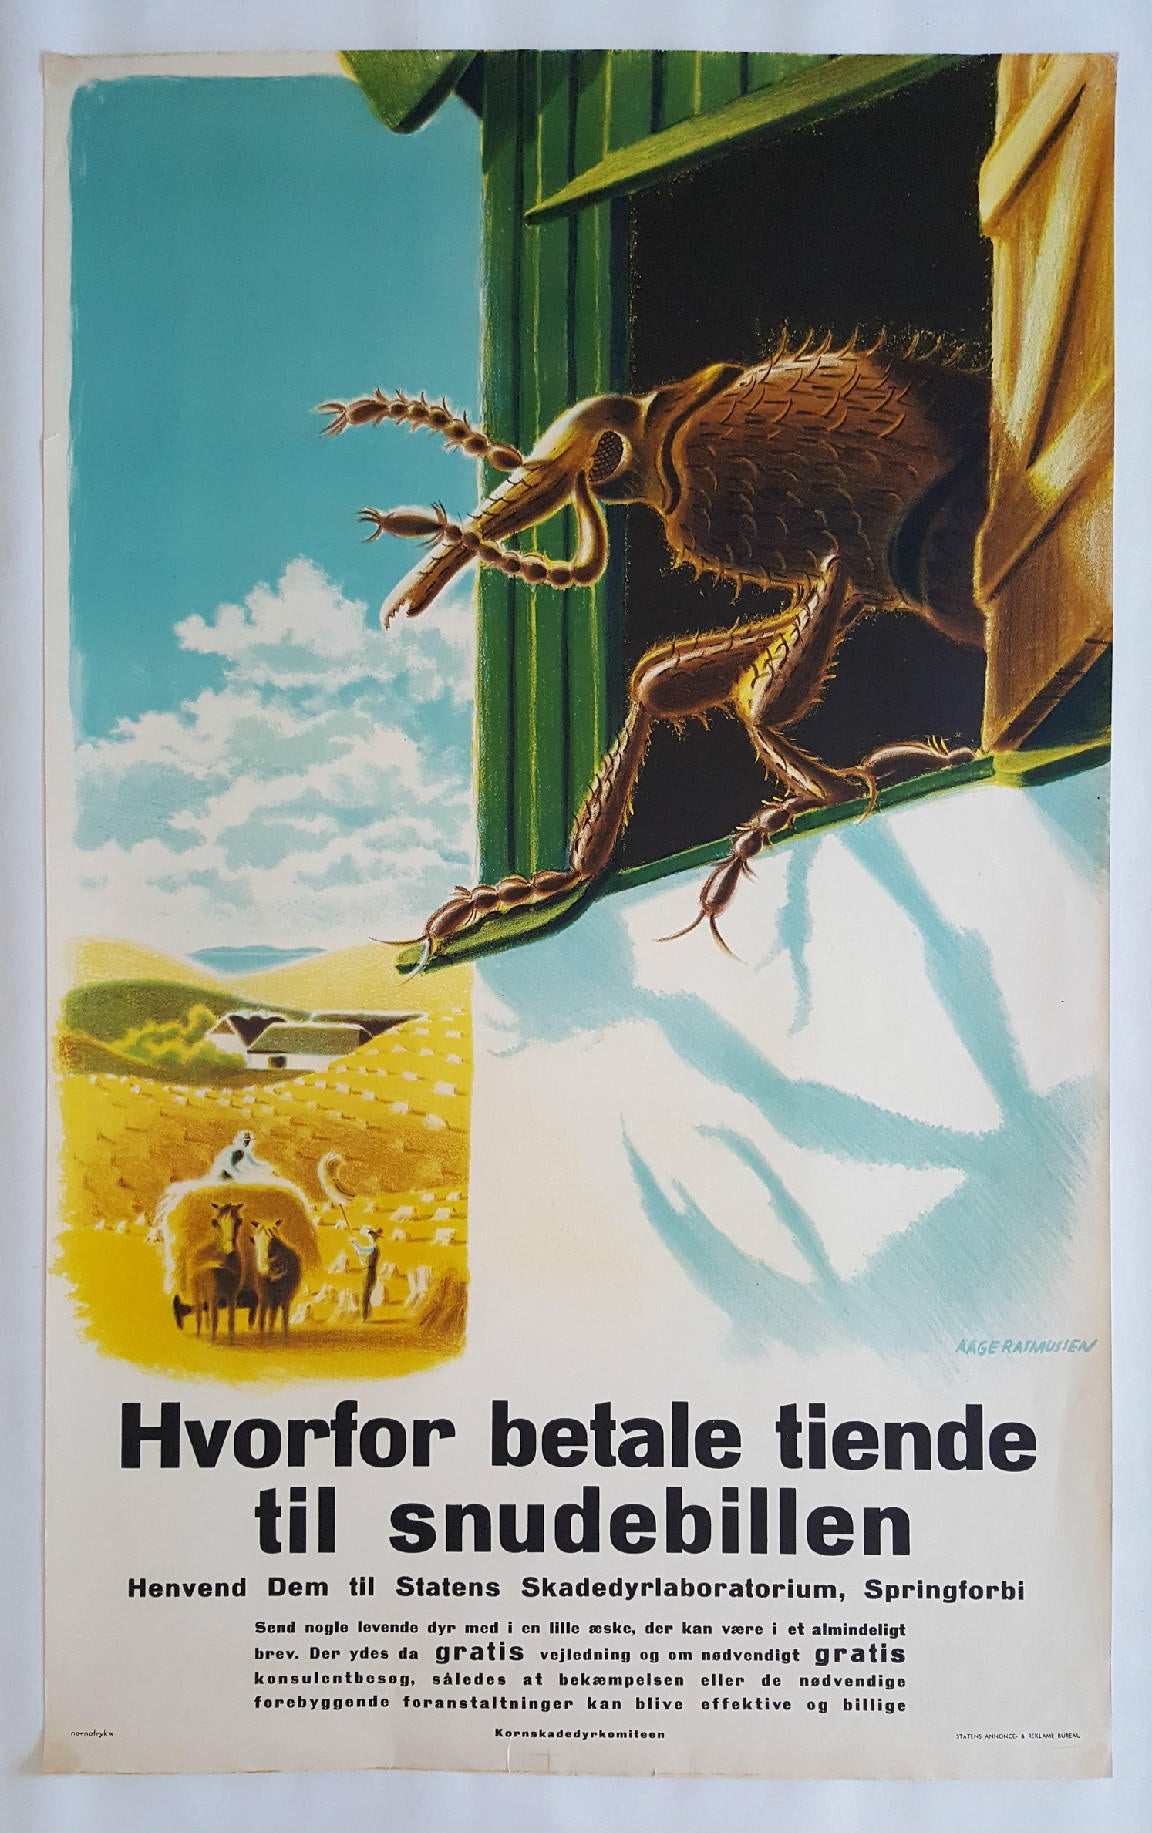 1940s Pest Campaign Poster by Aage Rasmussen - Original Vintage Poster